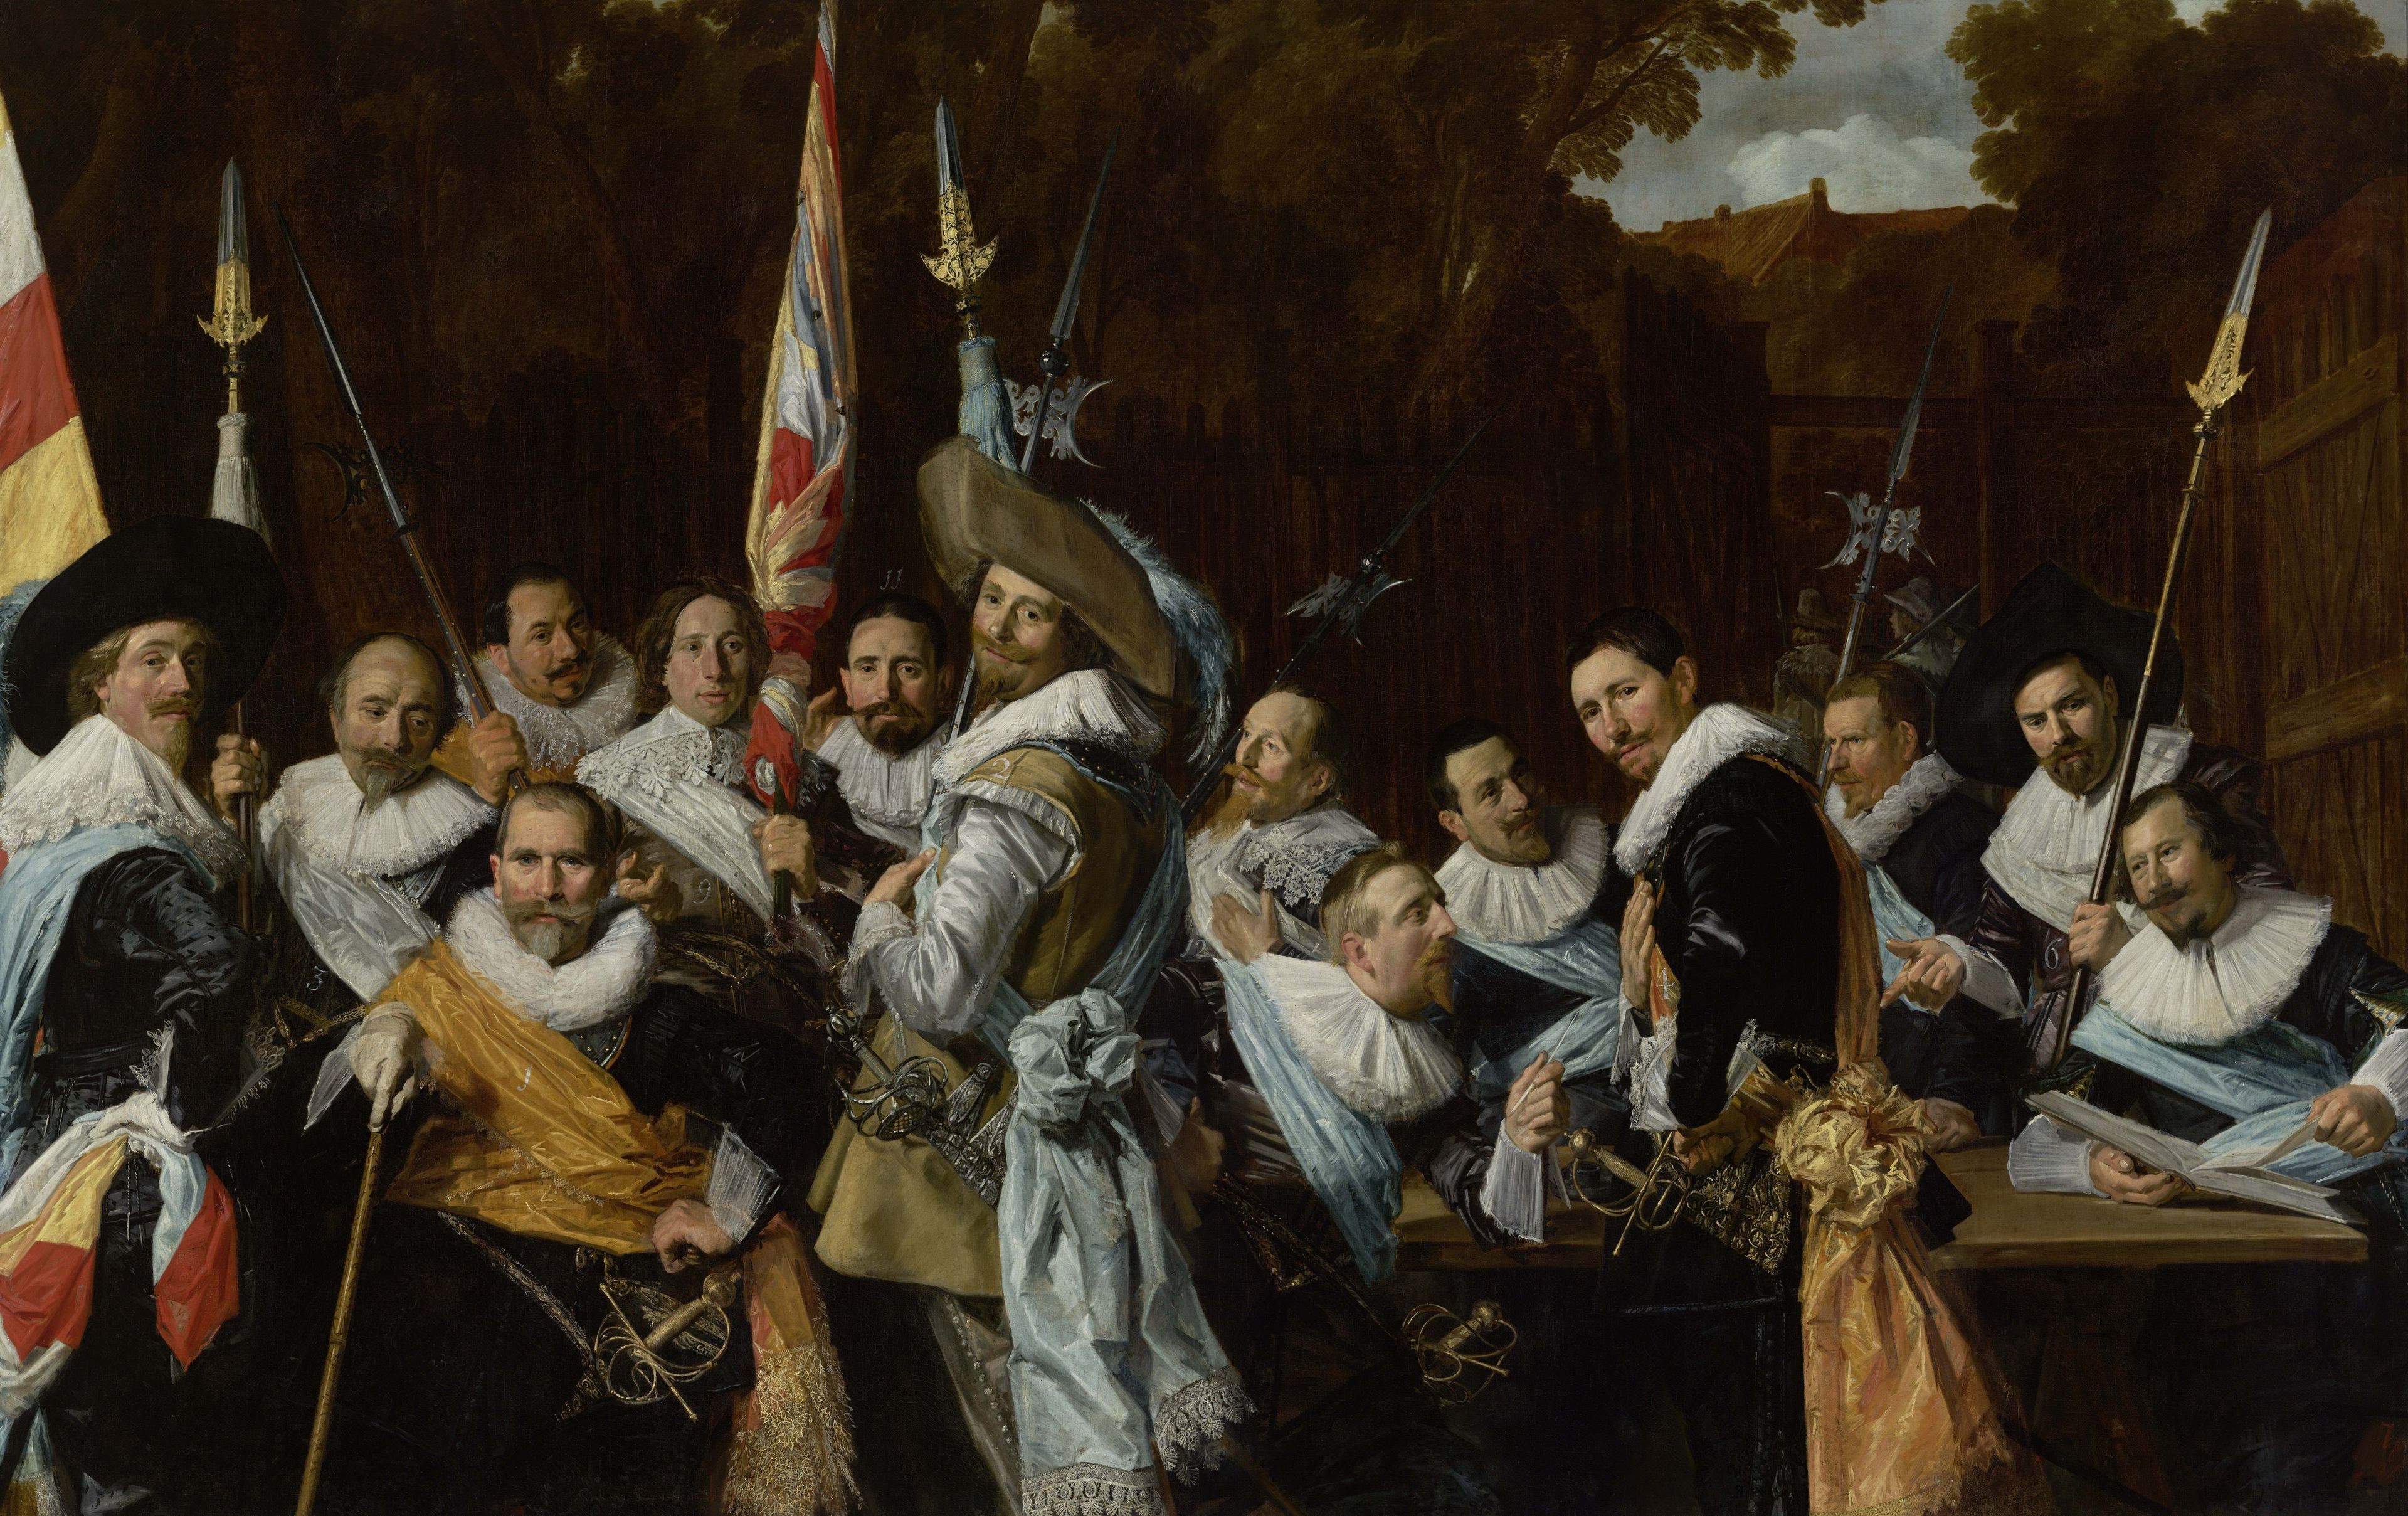 Frans Hals, ‘Meeting of the Officers and Sergeants of the Calivermen Civic Guard’ (1633), Frans Hals Museum, Haarlem.